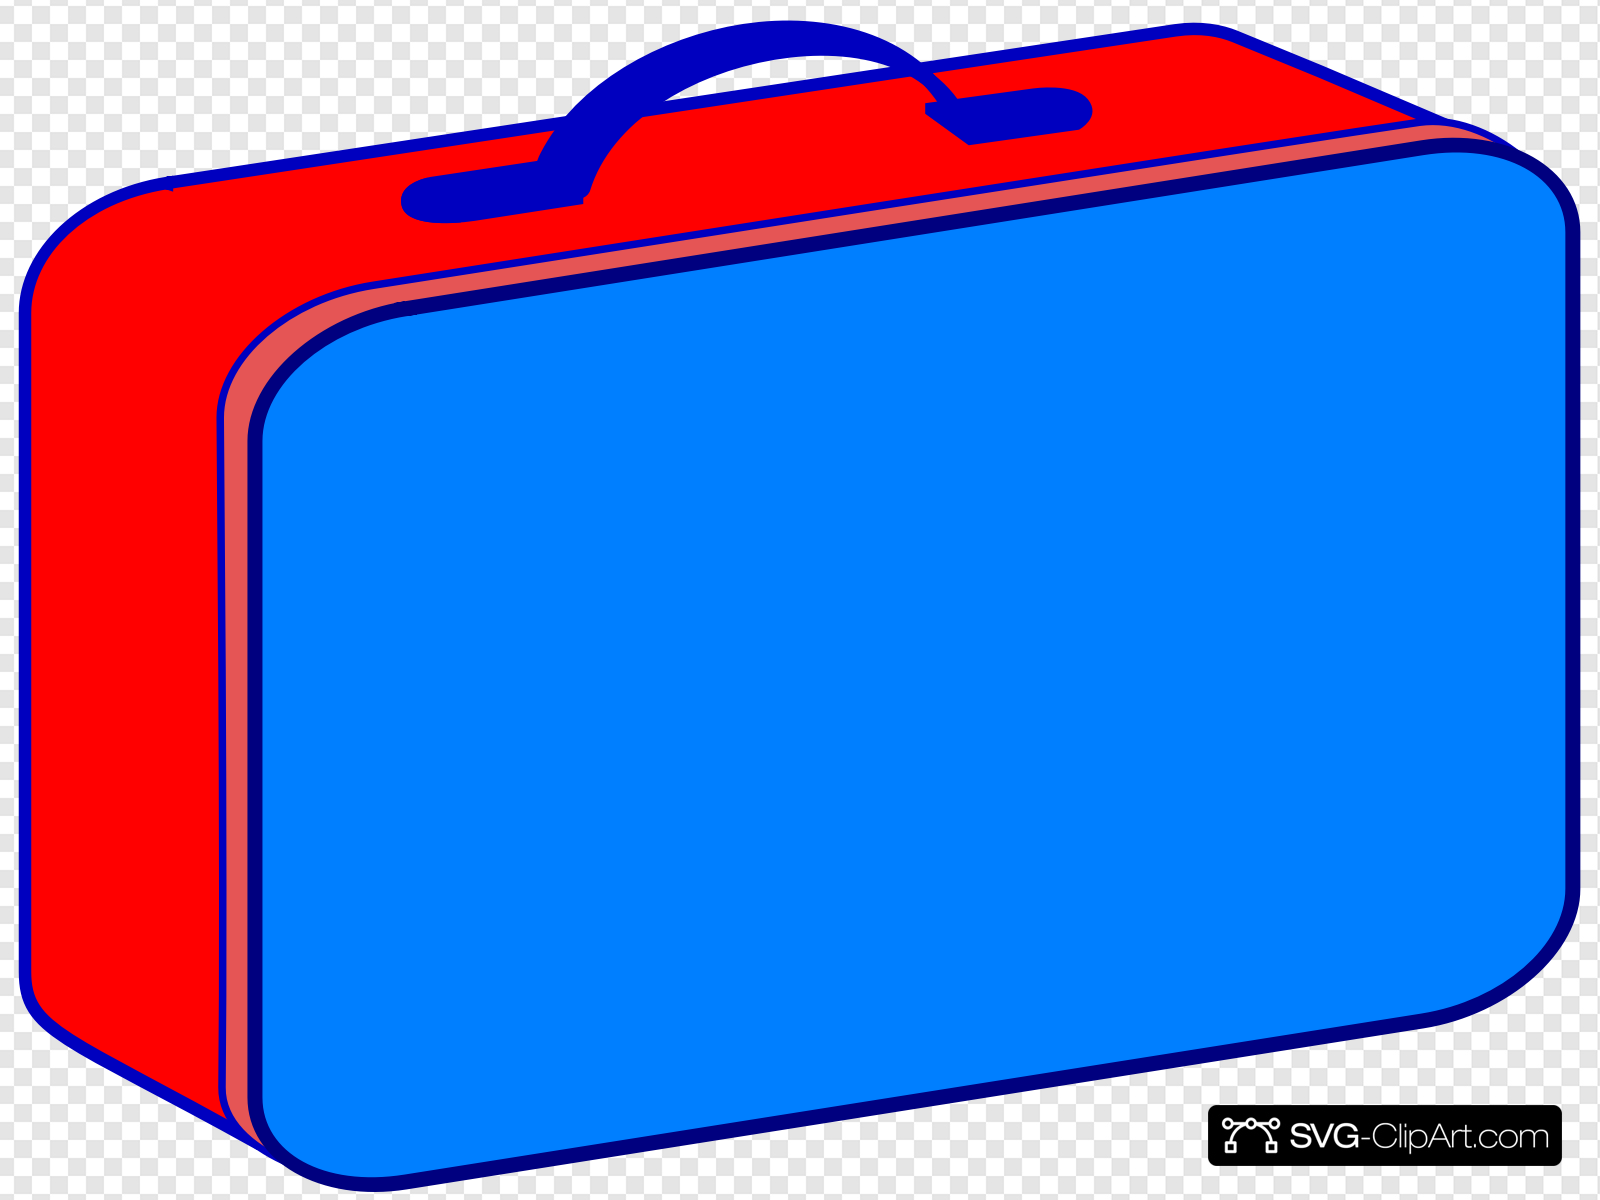 Red And Blue Lunchbox Clip art, Icon and SVG